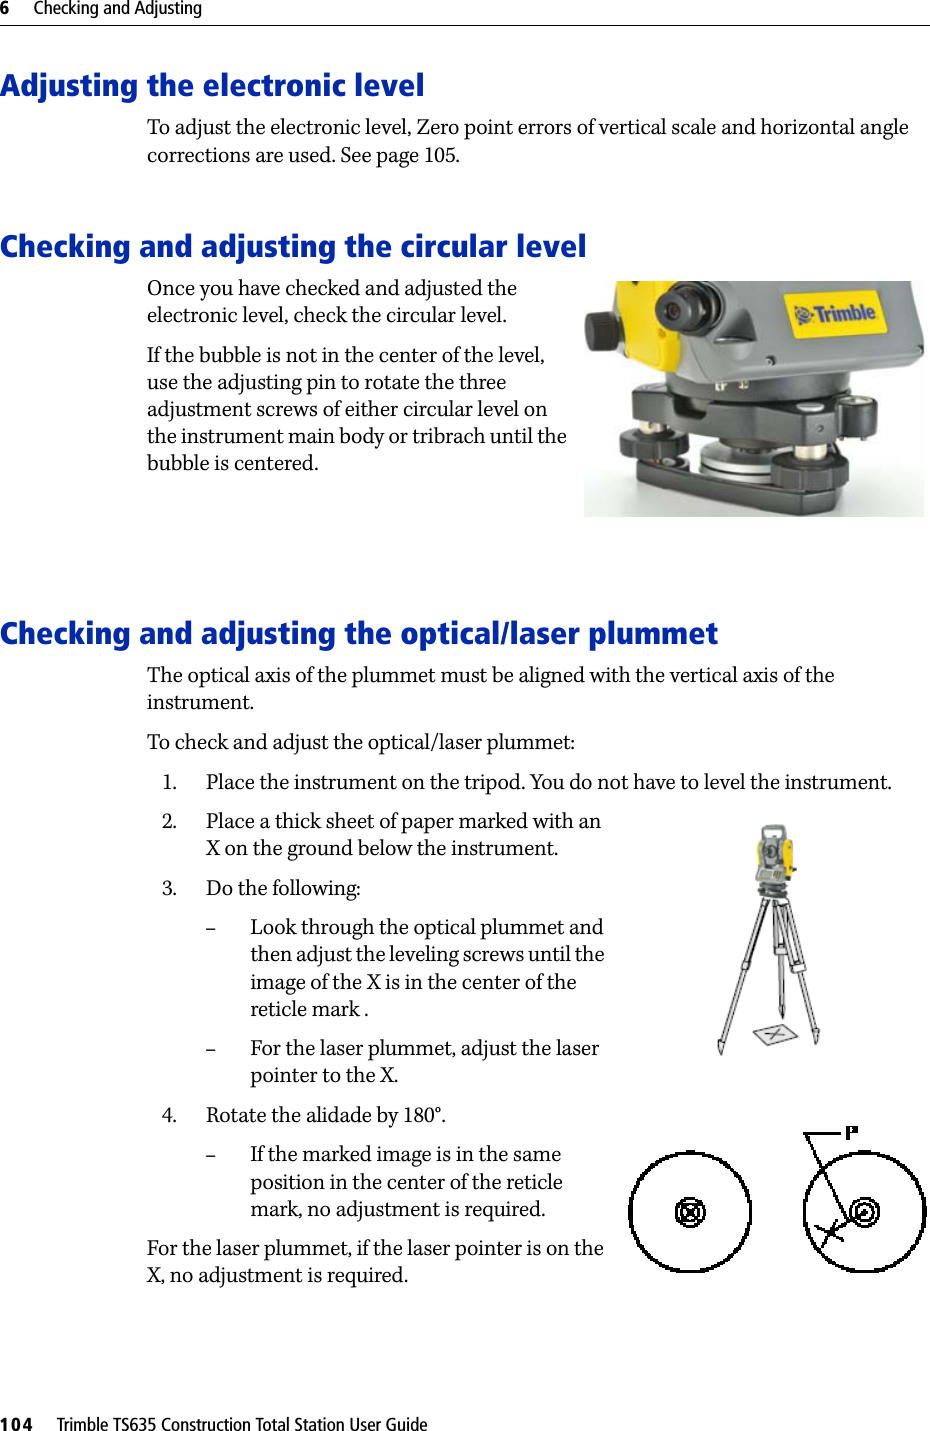 6     Checking and Adjusting104     Trimble TS635 Construction Total Station User GuideAdjusting the electronic levelTo adjust the electronic level, Zero point errors of vertical scale and horizontal angle corrections are used. See page 105. Checking and adjusting the circular levelOnce you have checked and adjusted the electronic level, check the circular level.If the bubble is not in the center of the level, use the adjusting pin to rotate the three adjustment screws of either circular level on the instrument main body or tribrach until the bubble is centered.Checking and adjusting the optical/laser plummetThe optical axis of the plummet must be aligned with the vertical axis of the instrument.To check and adjust the optical/laser plummet:1. Place the instrument on the tripod. You do not have to level the instrument.2. Place a thick sheet of paper marked with an X on the ground below the instrument.3. Do the following:–Look through the optical plummet and then adjust the leveling screws until the image of the X is in the center of the reticle mark .–For the laser plummet, adjust the laser pointer to the X.4. Rotate the alidade by 180°. –If the marked image is in the same position in the center of the reticle mark, no adjustment is required.For the laser plummet, if the laser pointer is on the X, no adjustment is required.